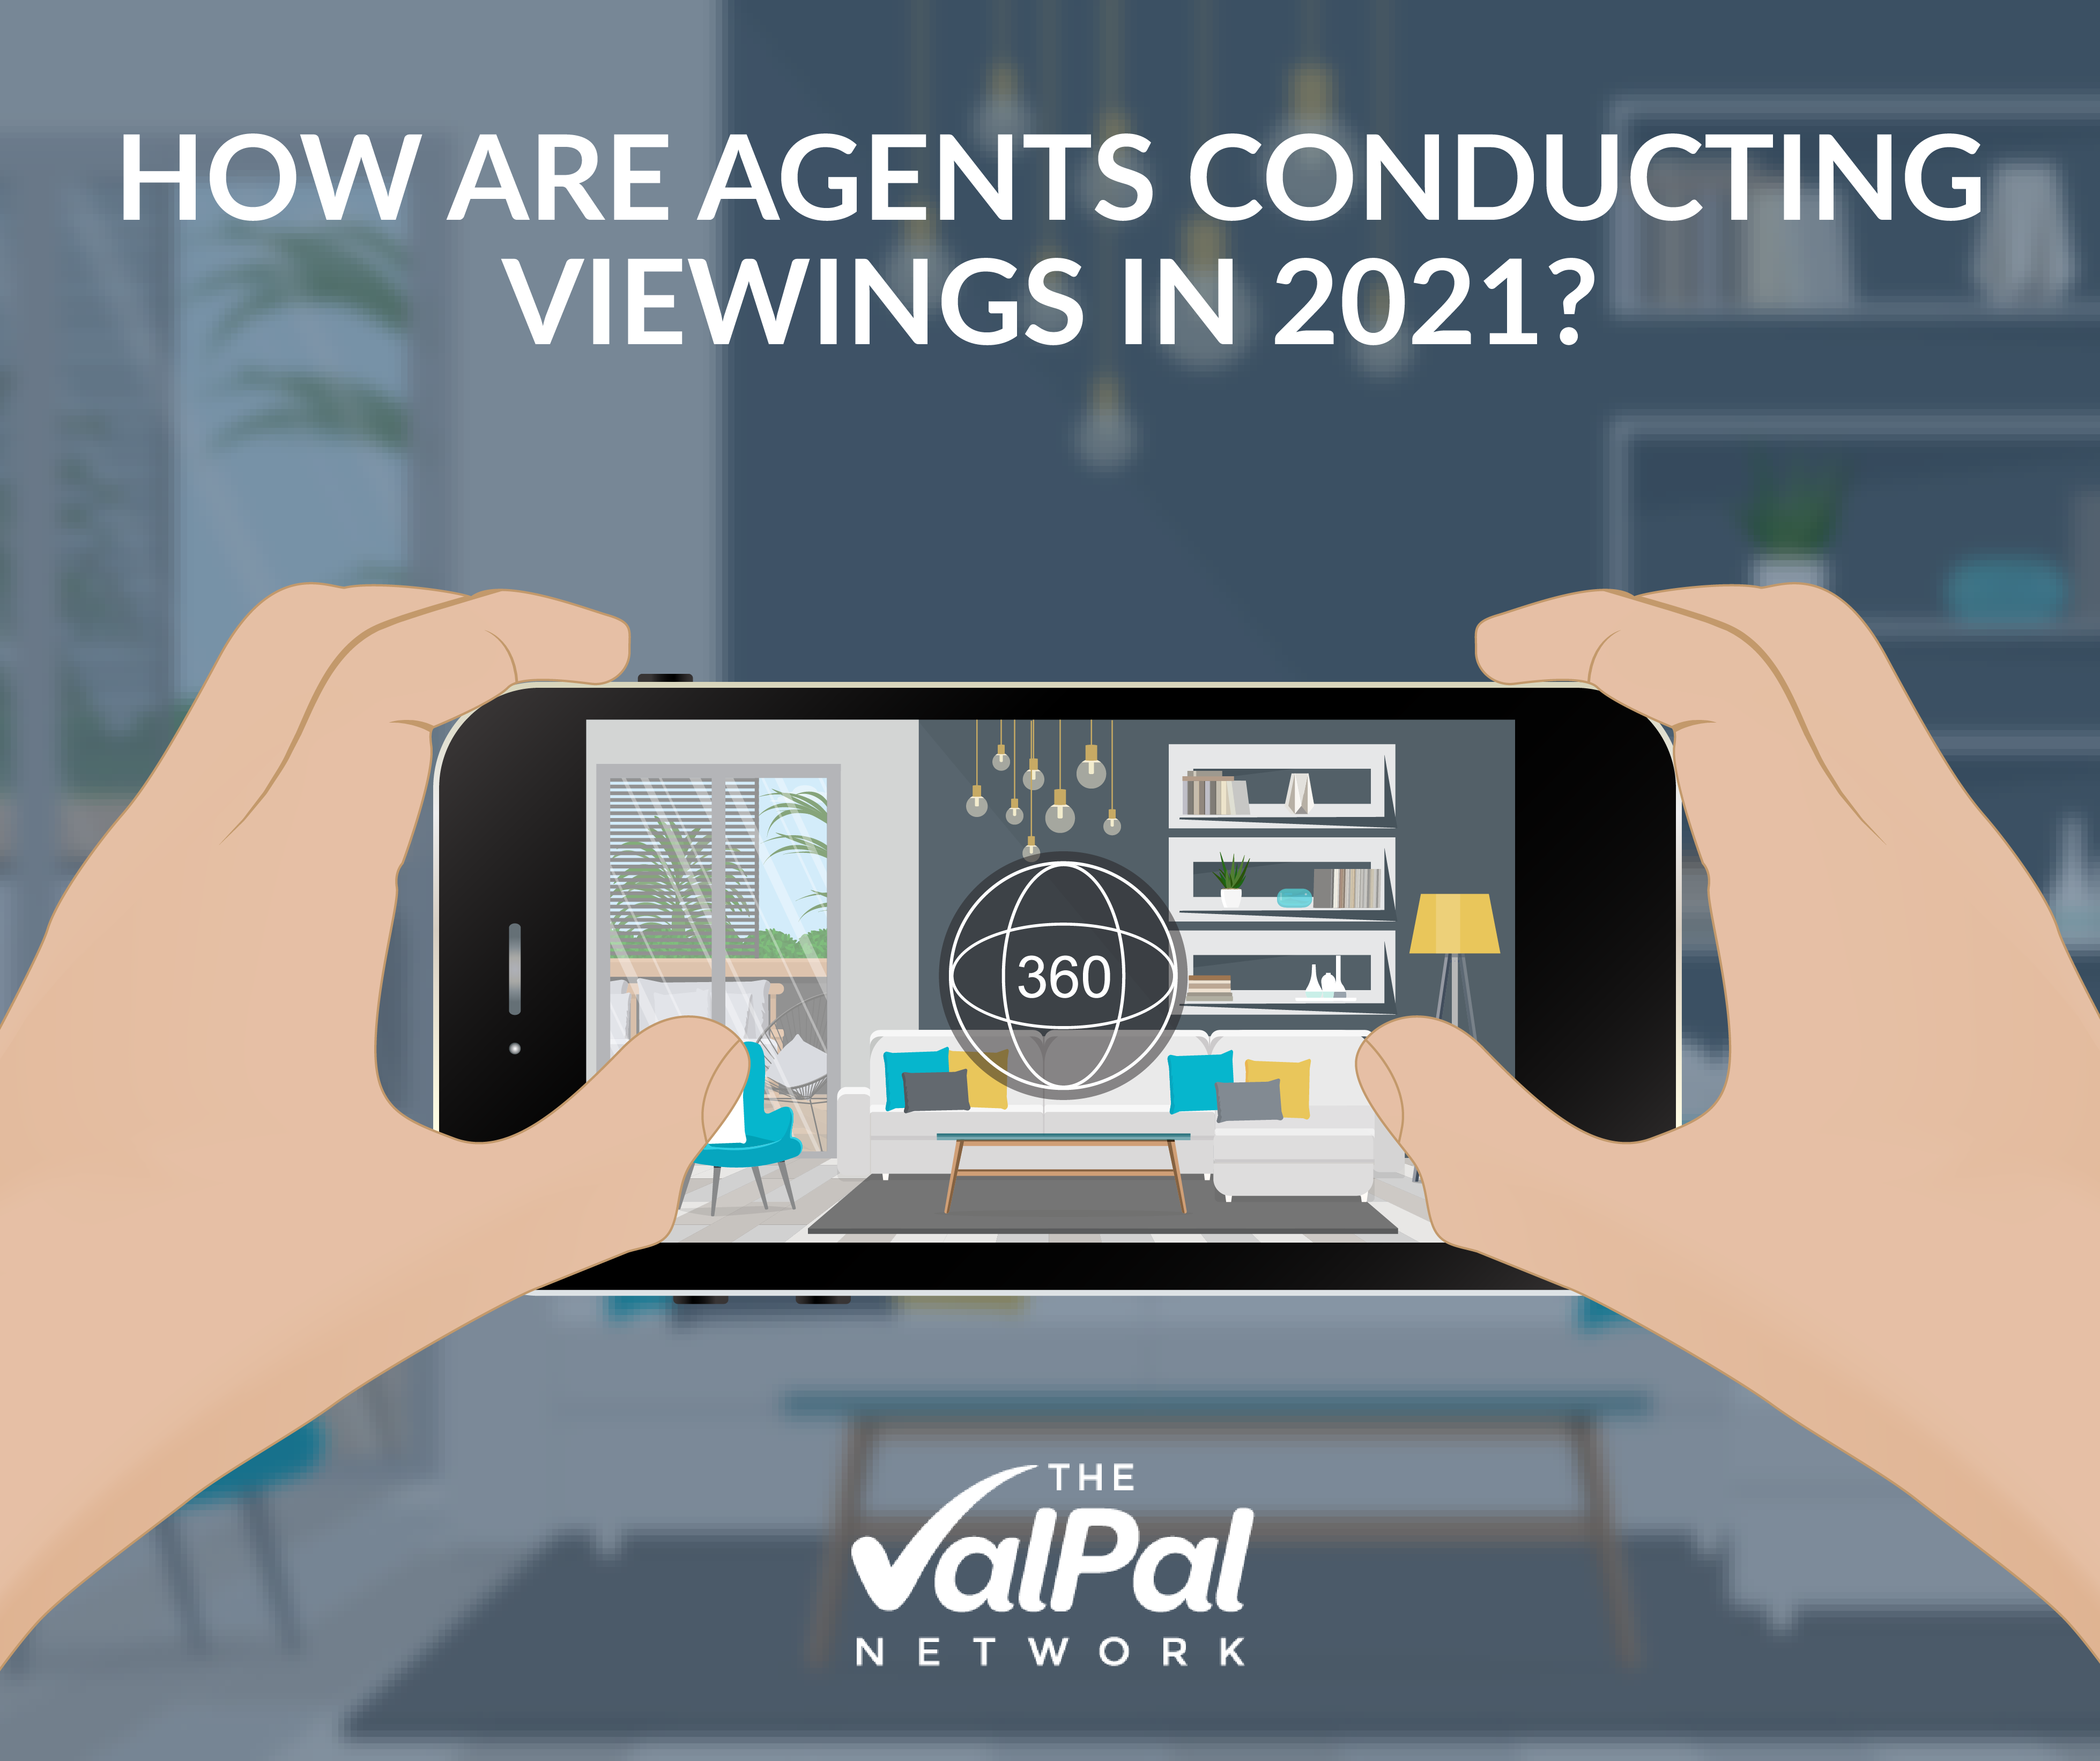 How are agents conducting viewings in 2021?